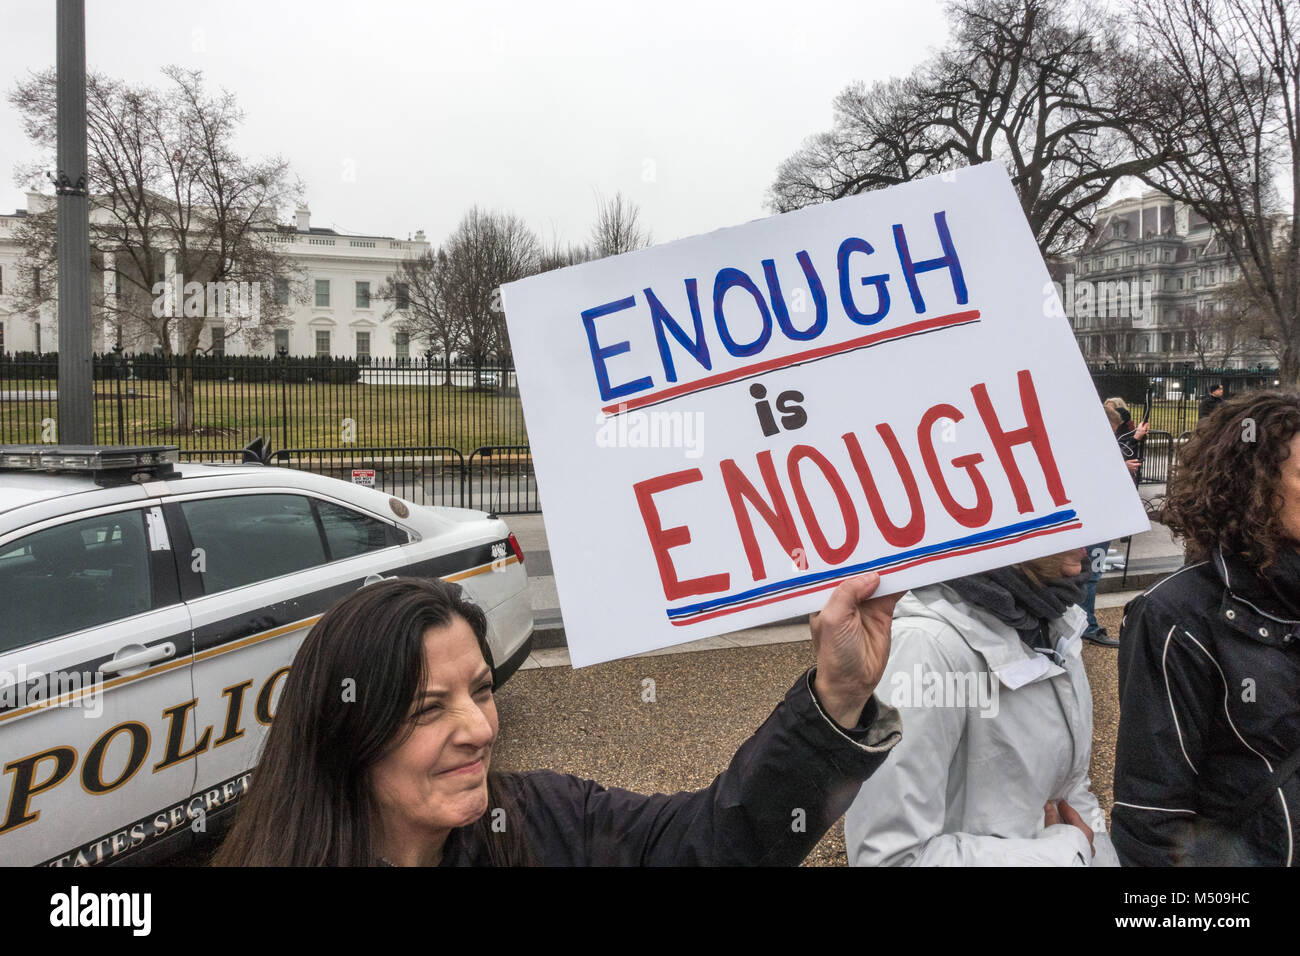 Washington, DC, USA. 19th February, 2018. Demonstrators in front of the White House protest government's long-standing inaction on gun control, following deadly shooting in a south Florida high school by a former student, 19-year old Nikolas Cruz, who had legally purchased an AR-15 assault rifle, which he used to kill 17 students and wound numerous others. Bob Korn/Alamy Live News Stock Photo